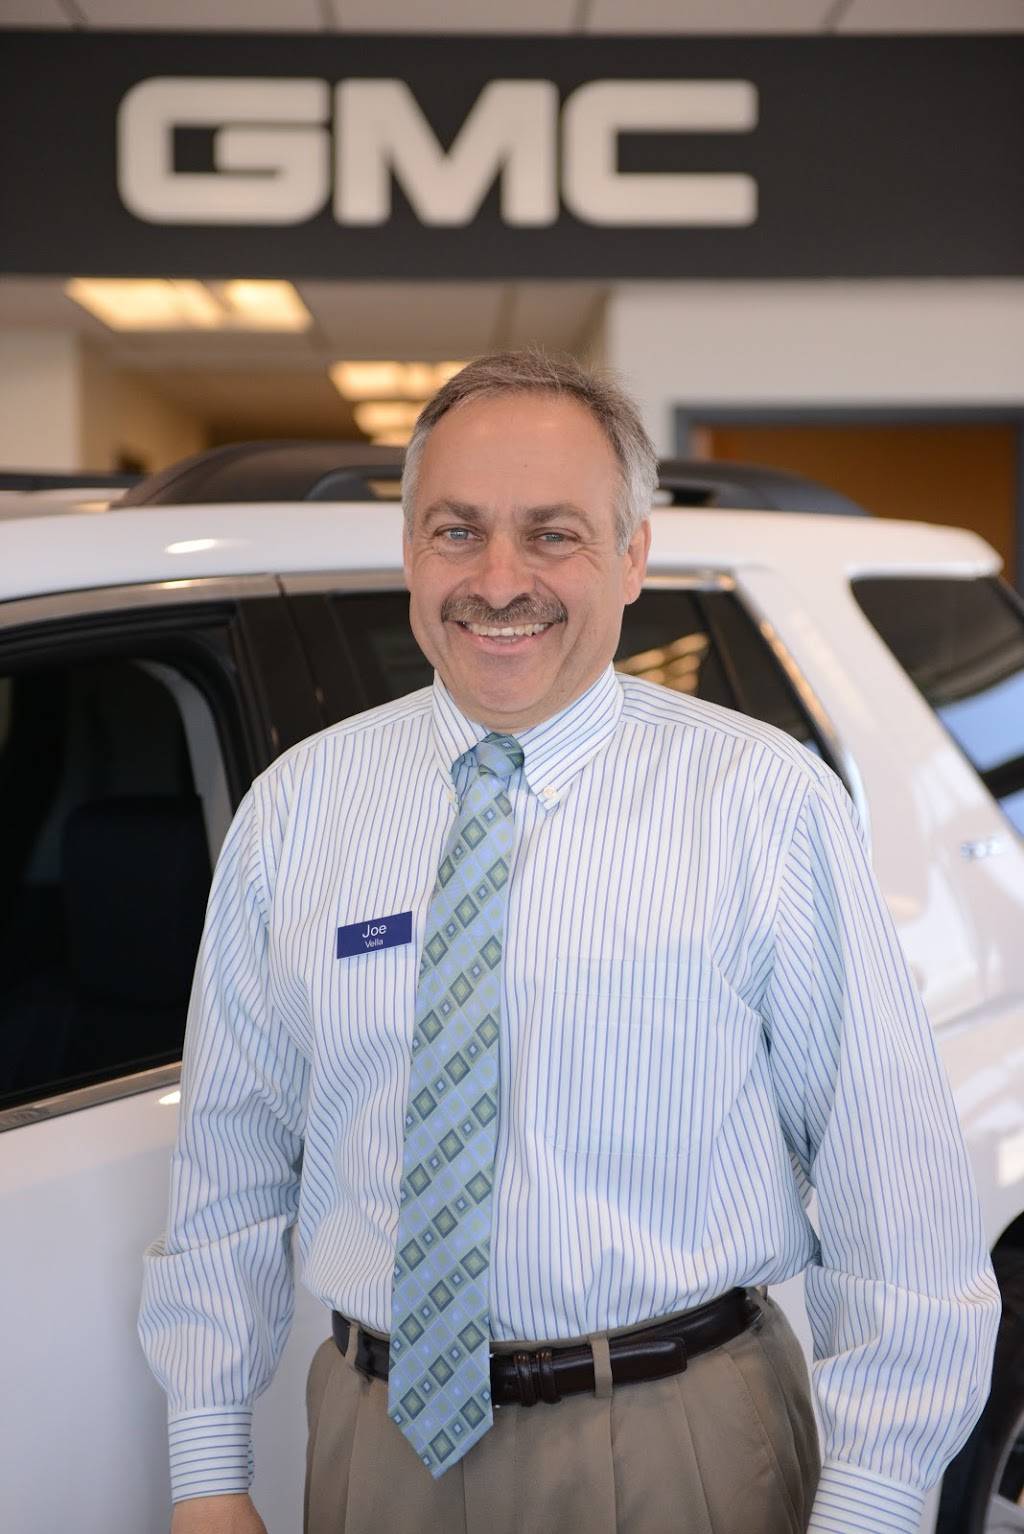 Sommers Buick GMC | 7211 W Mequon Rd, Mequon, WI 53092 | Phone: (262) 242-0100